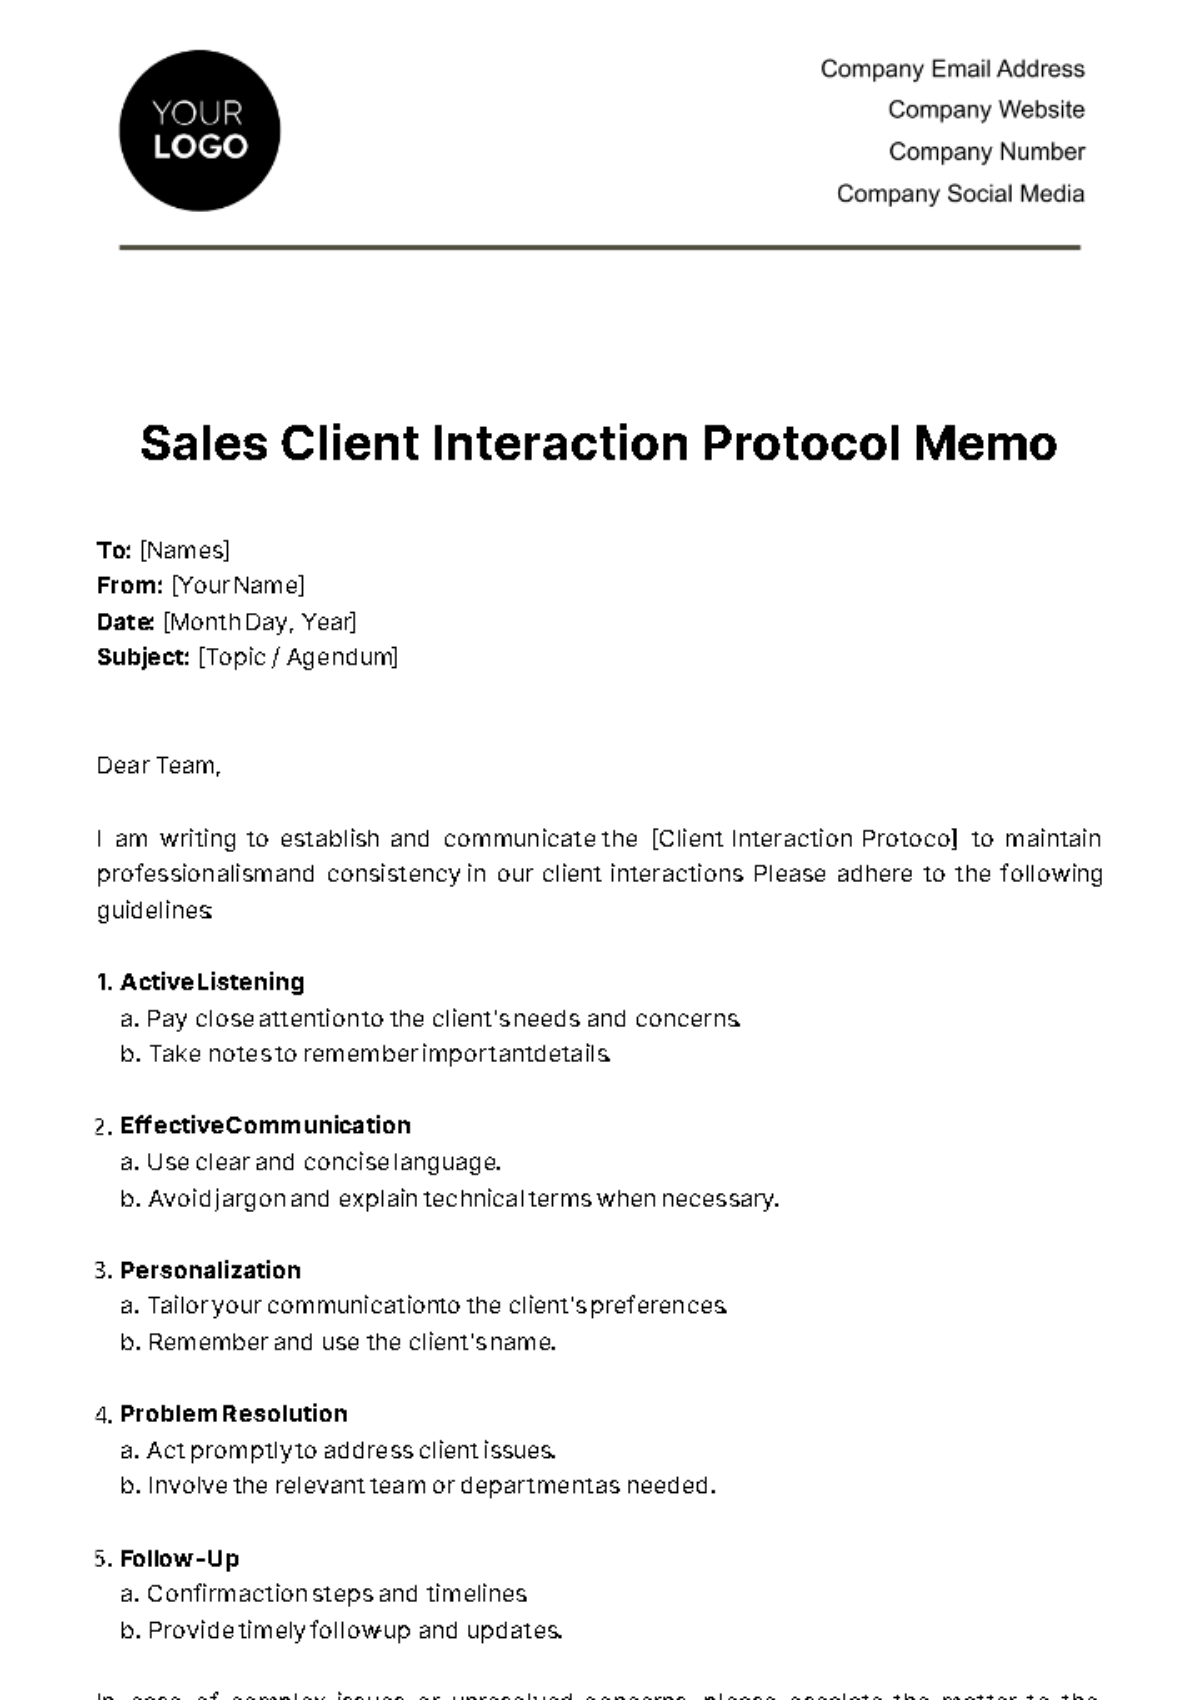 Free Sales Client Interaction Protocol Memo Template